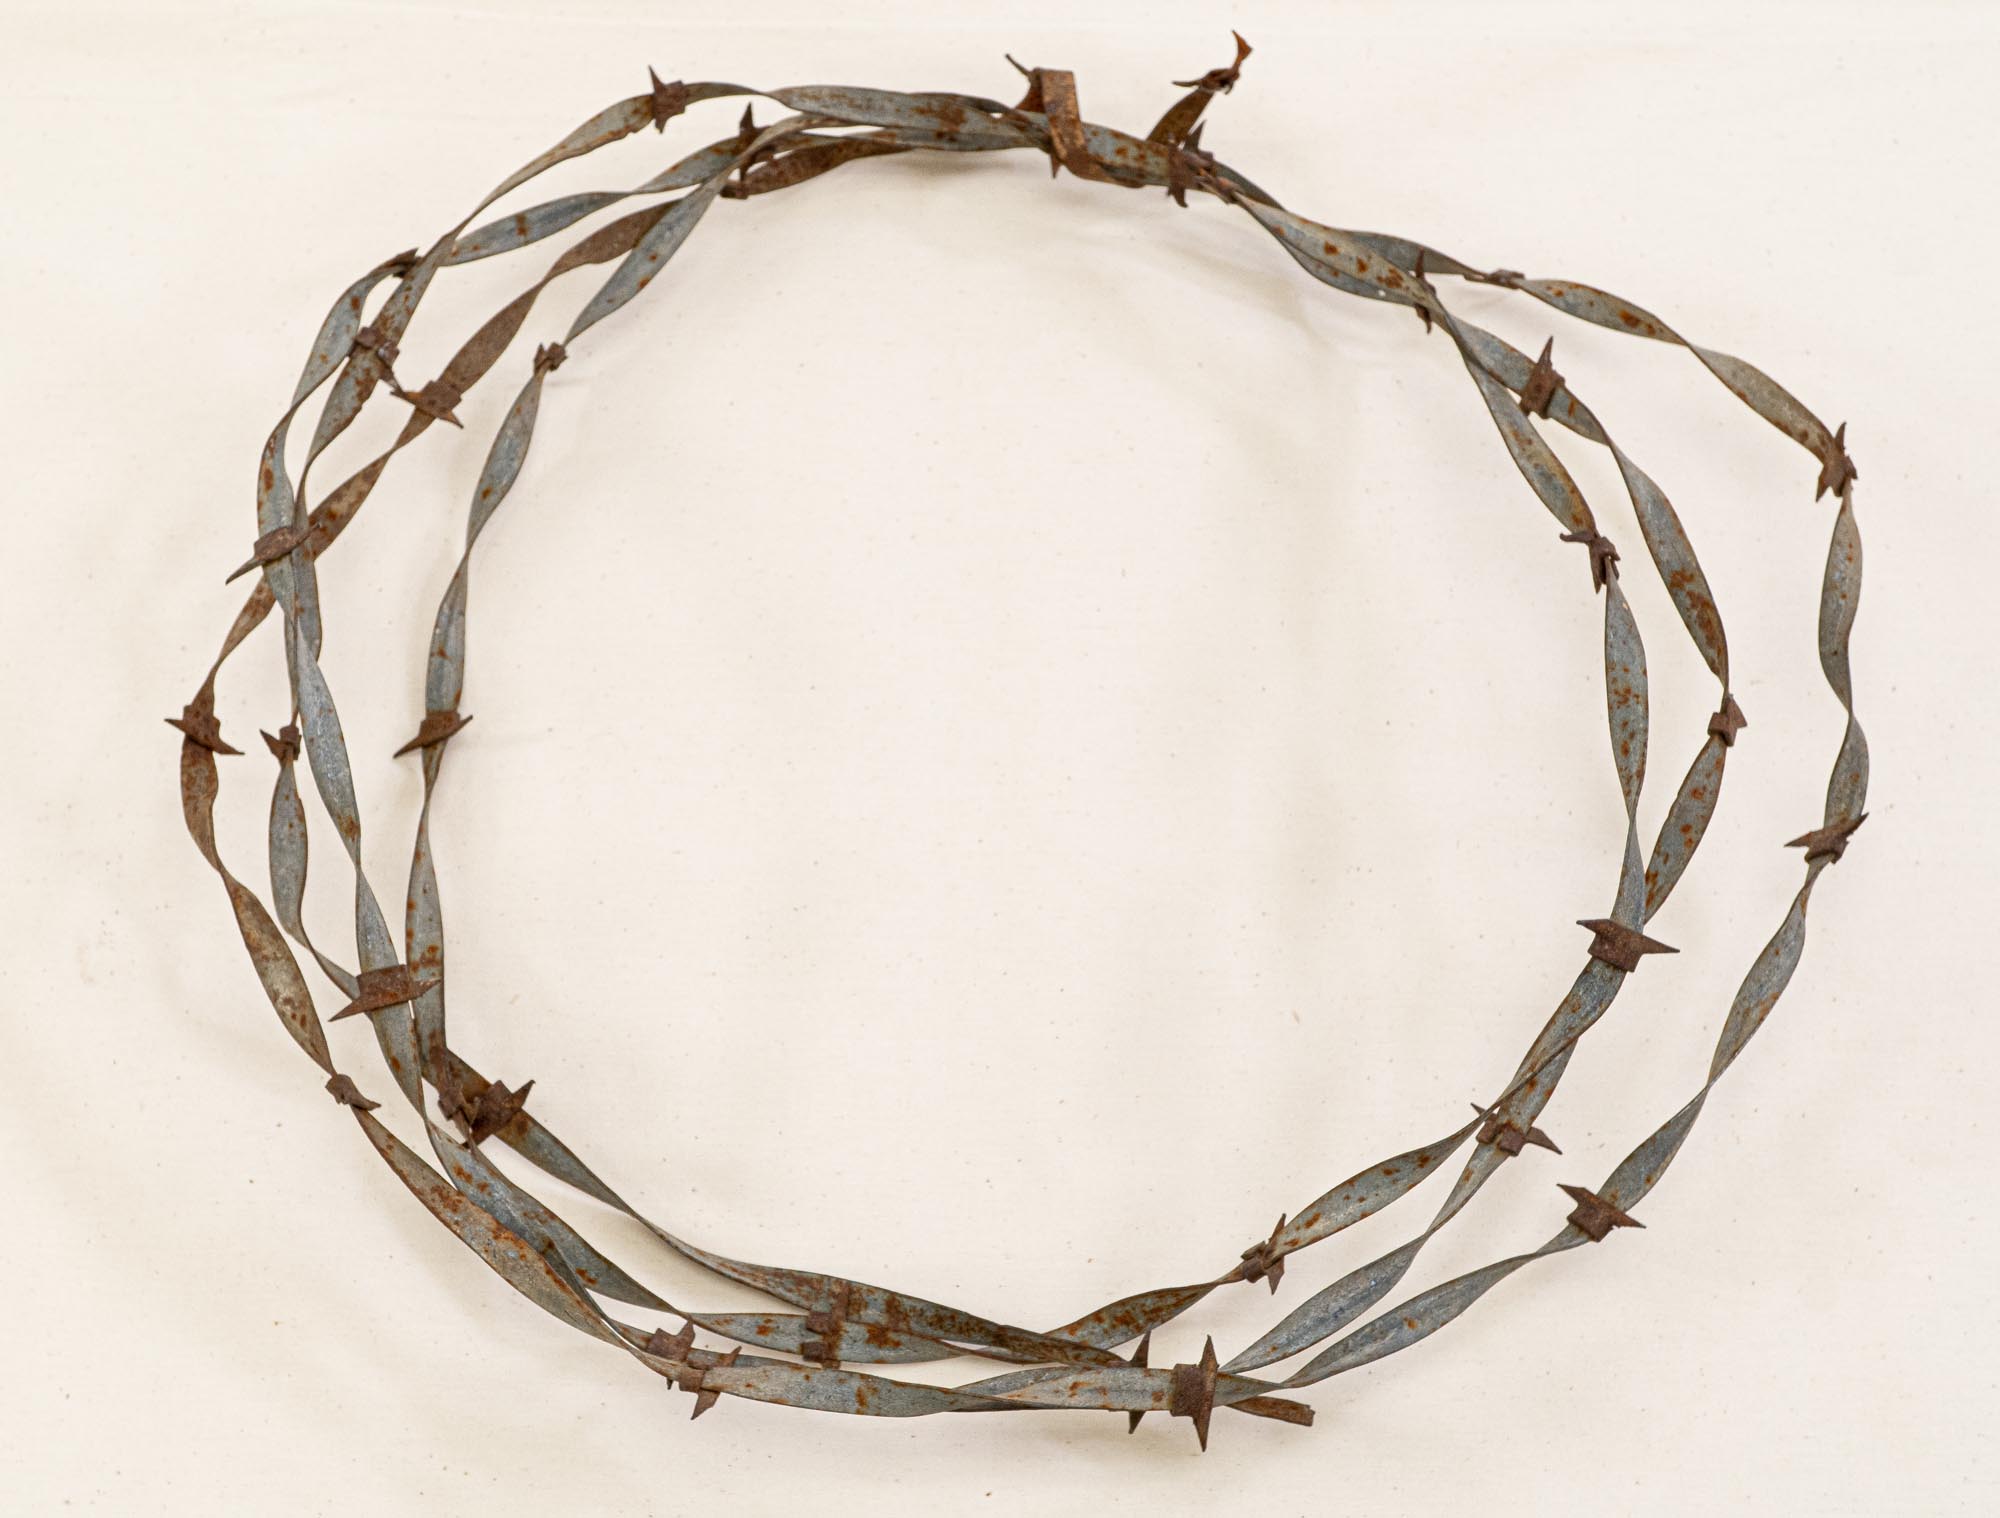 Barbed wire in the Ranching: Cattle Boom exhibit at the Museum of the Coastal Bend